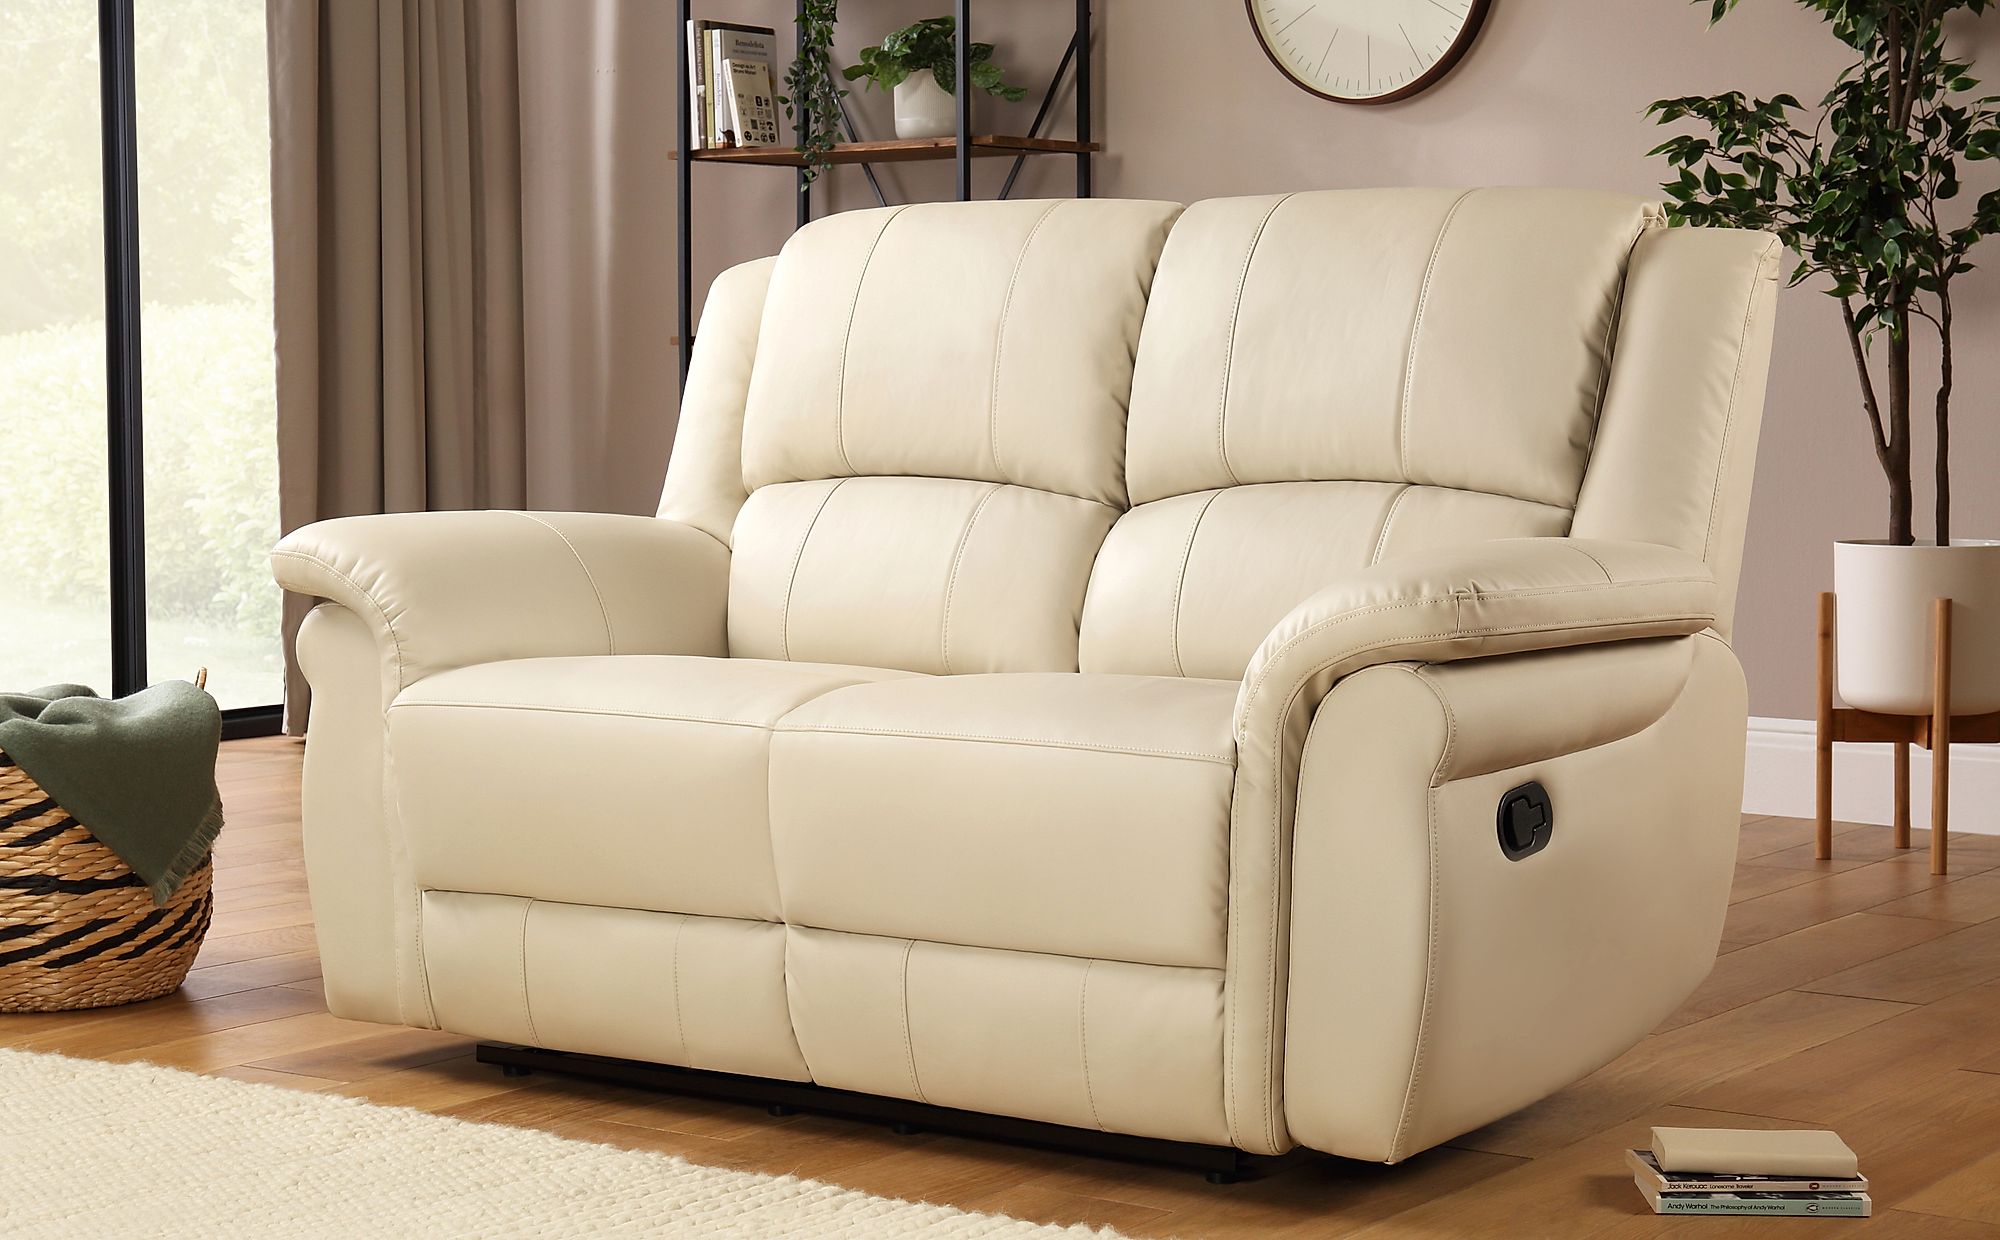 2 seater leather recliner sofa with drinks console